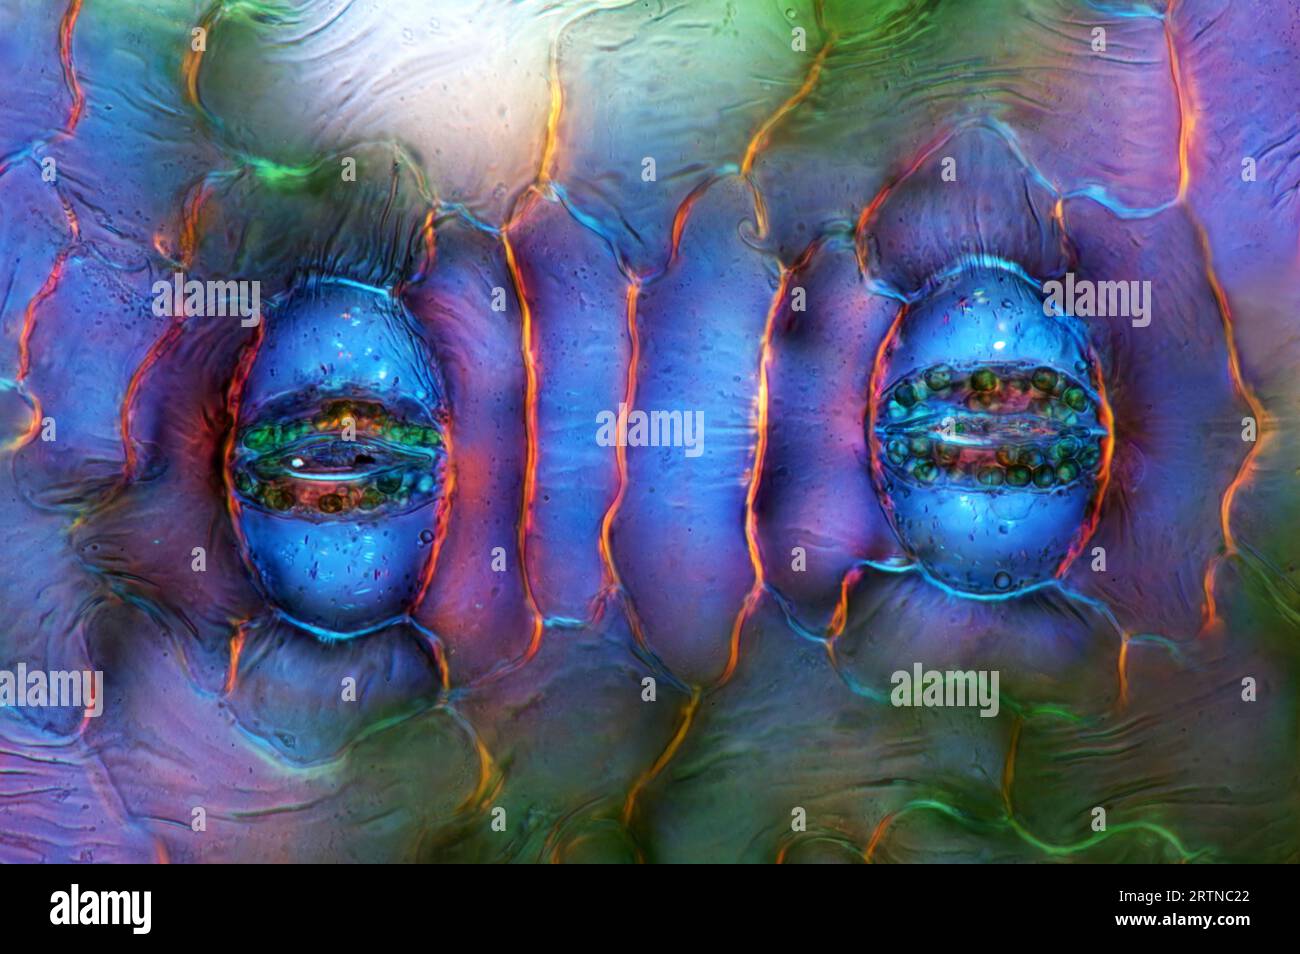 The image presents  stomata in Spathiphyllum leaf epidermis, photographed through the microscope in polarized light at a magnification of 400X Stock Photo